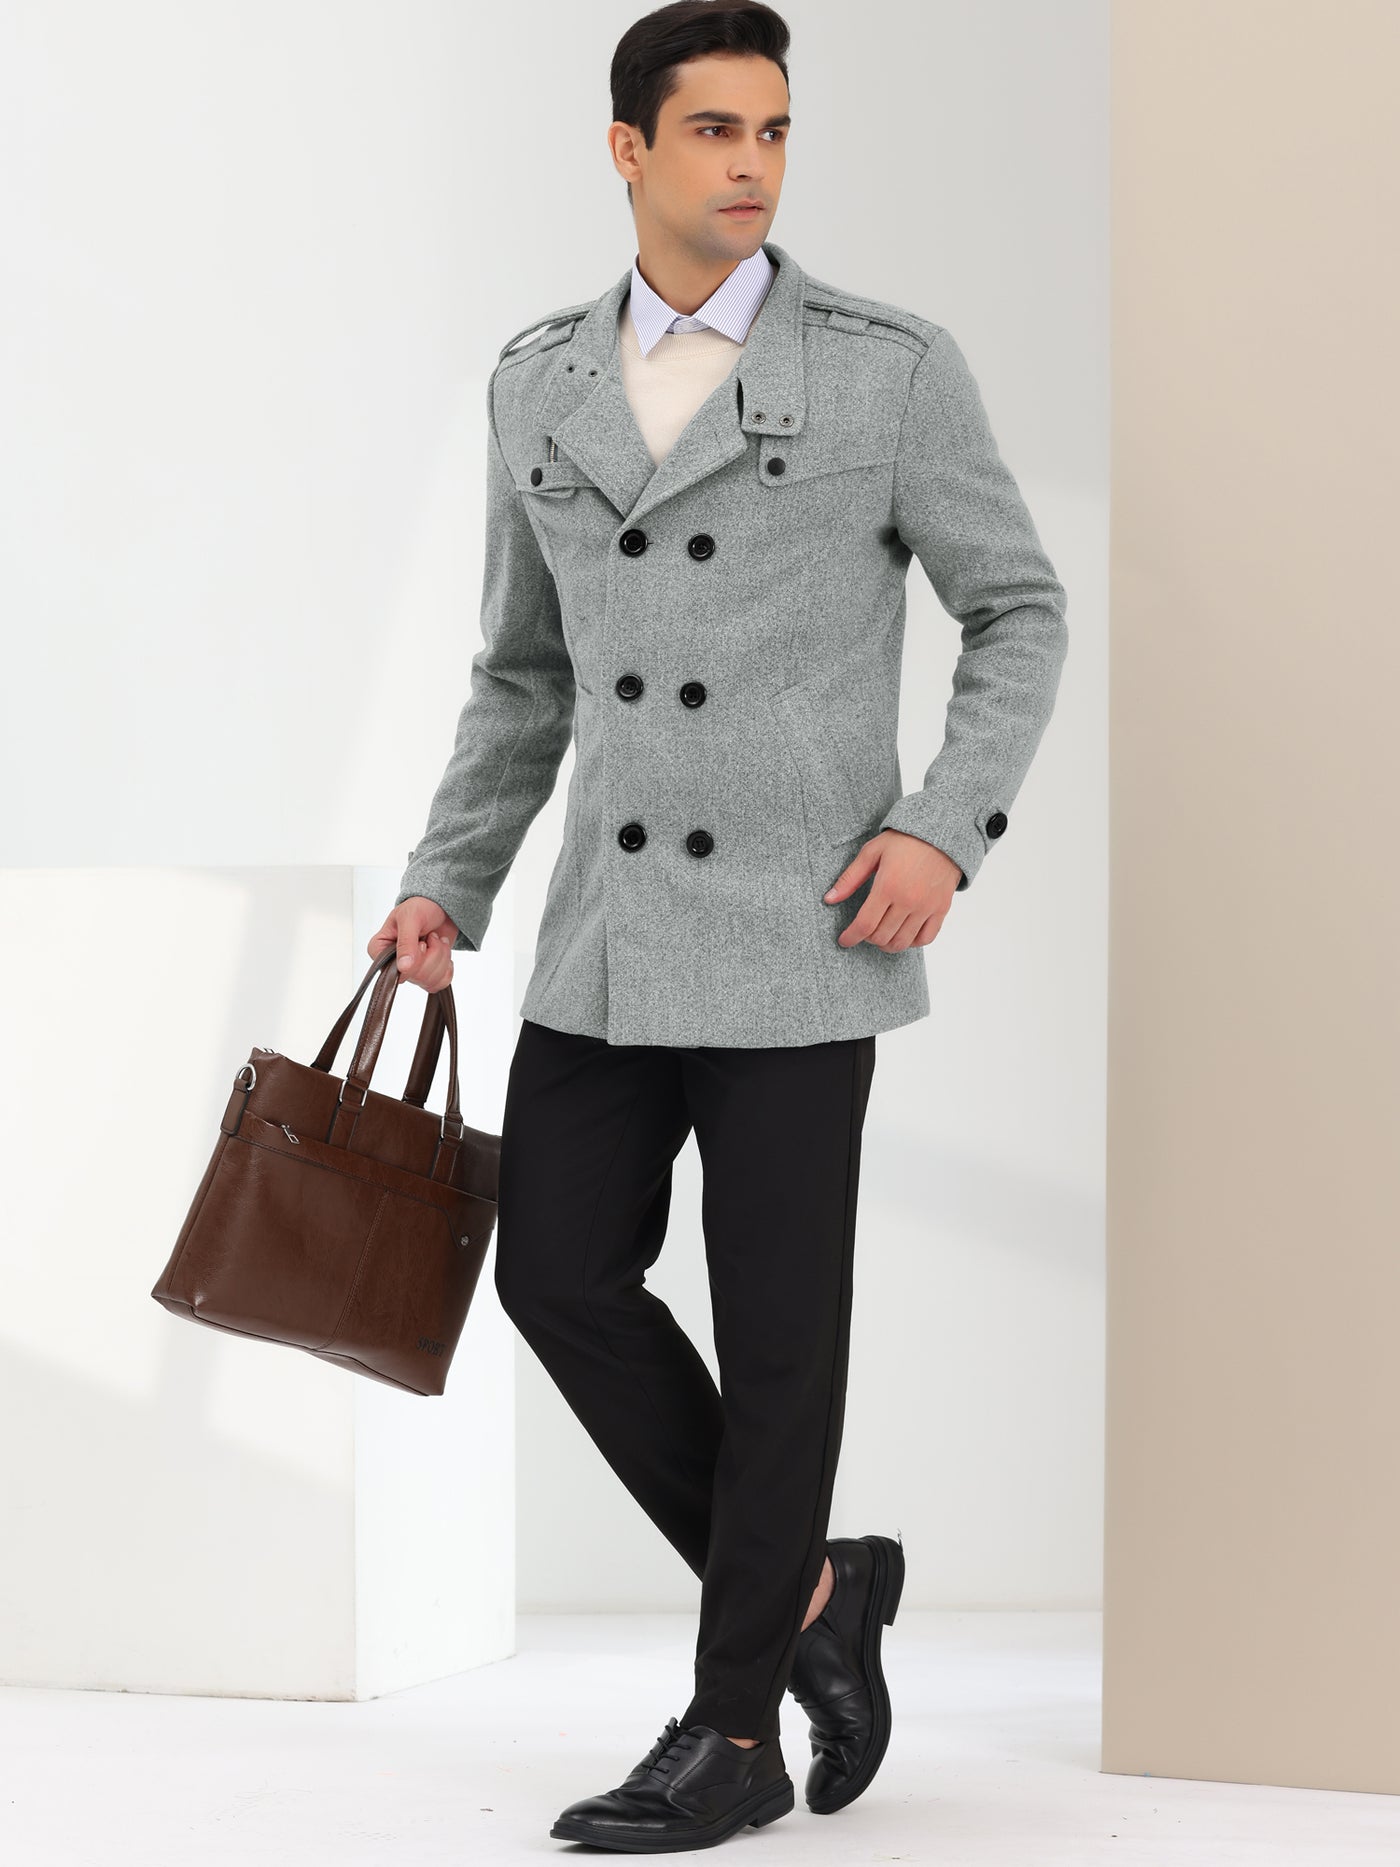 Bublédon Men's Winter Trench Coat Stand Collar Double Breasted Notch Lapel Pea Coats